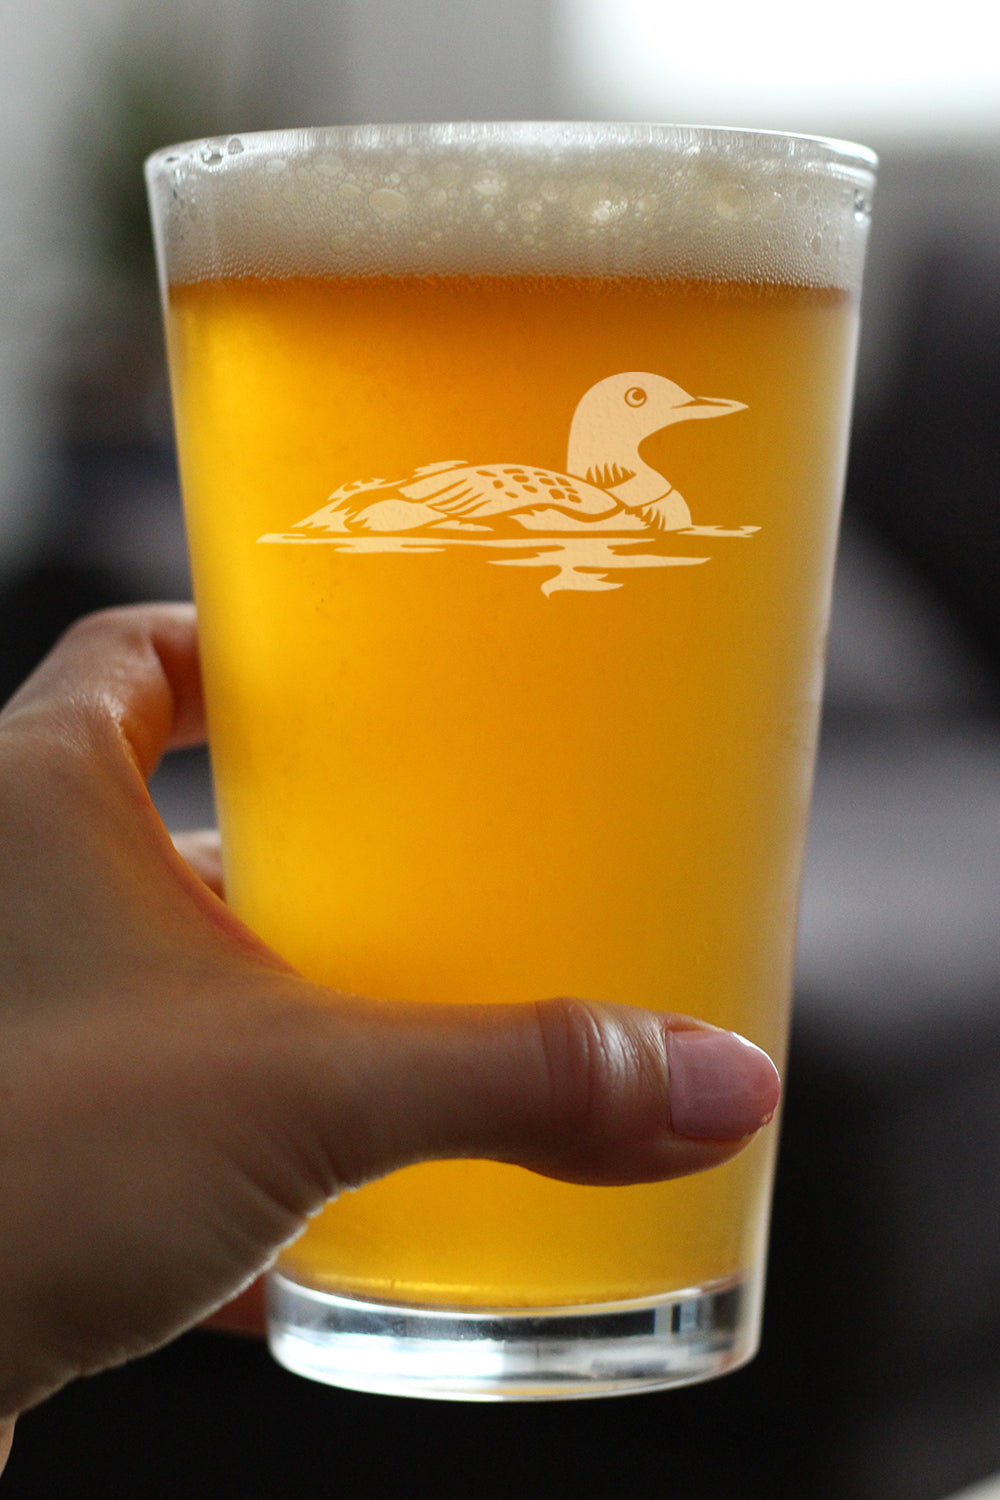 Loon Pint Glass for Beer - Fun Bird Themed Gifts and Decor for Men &amp; Women - 16 oz Glasses